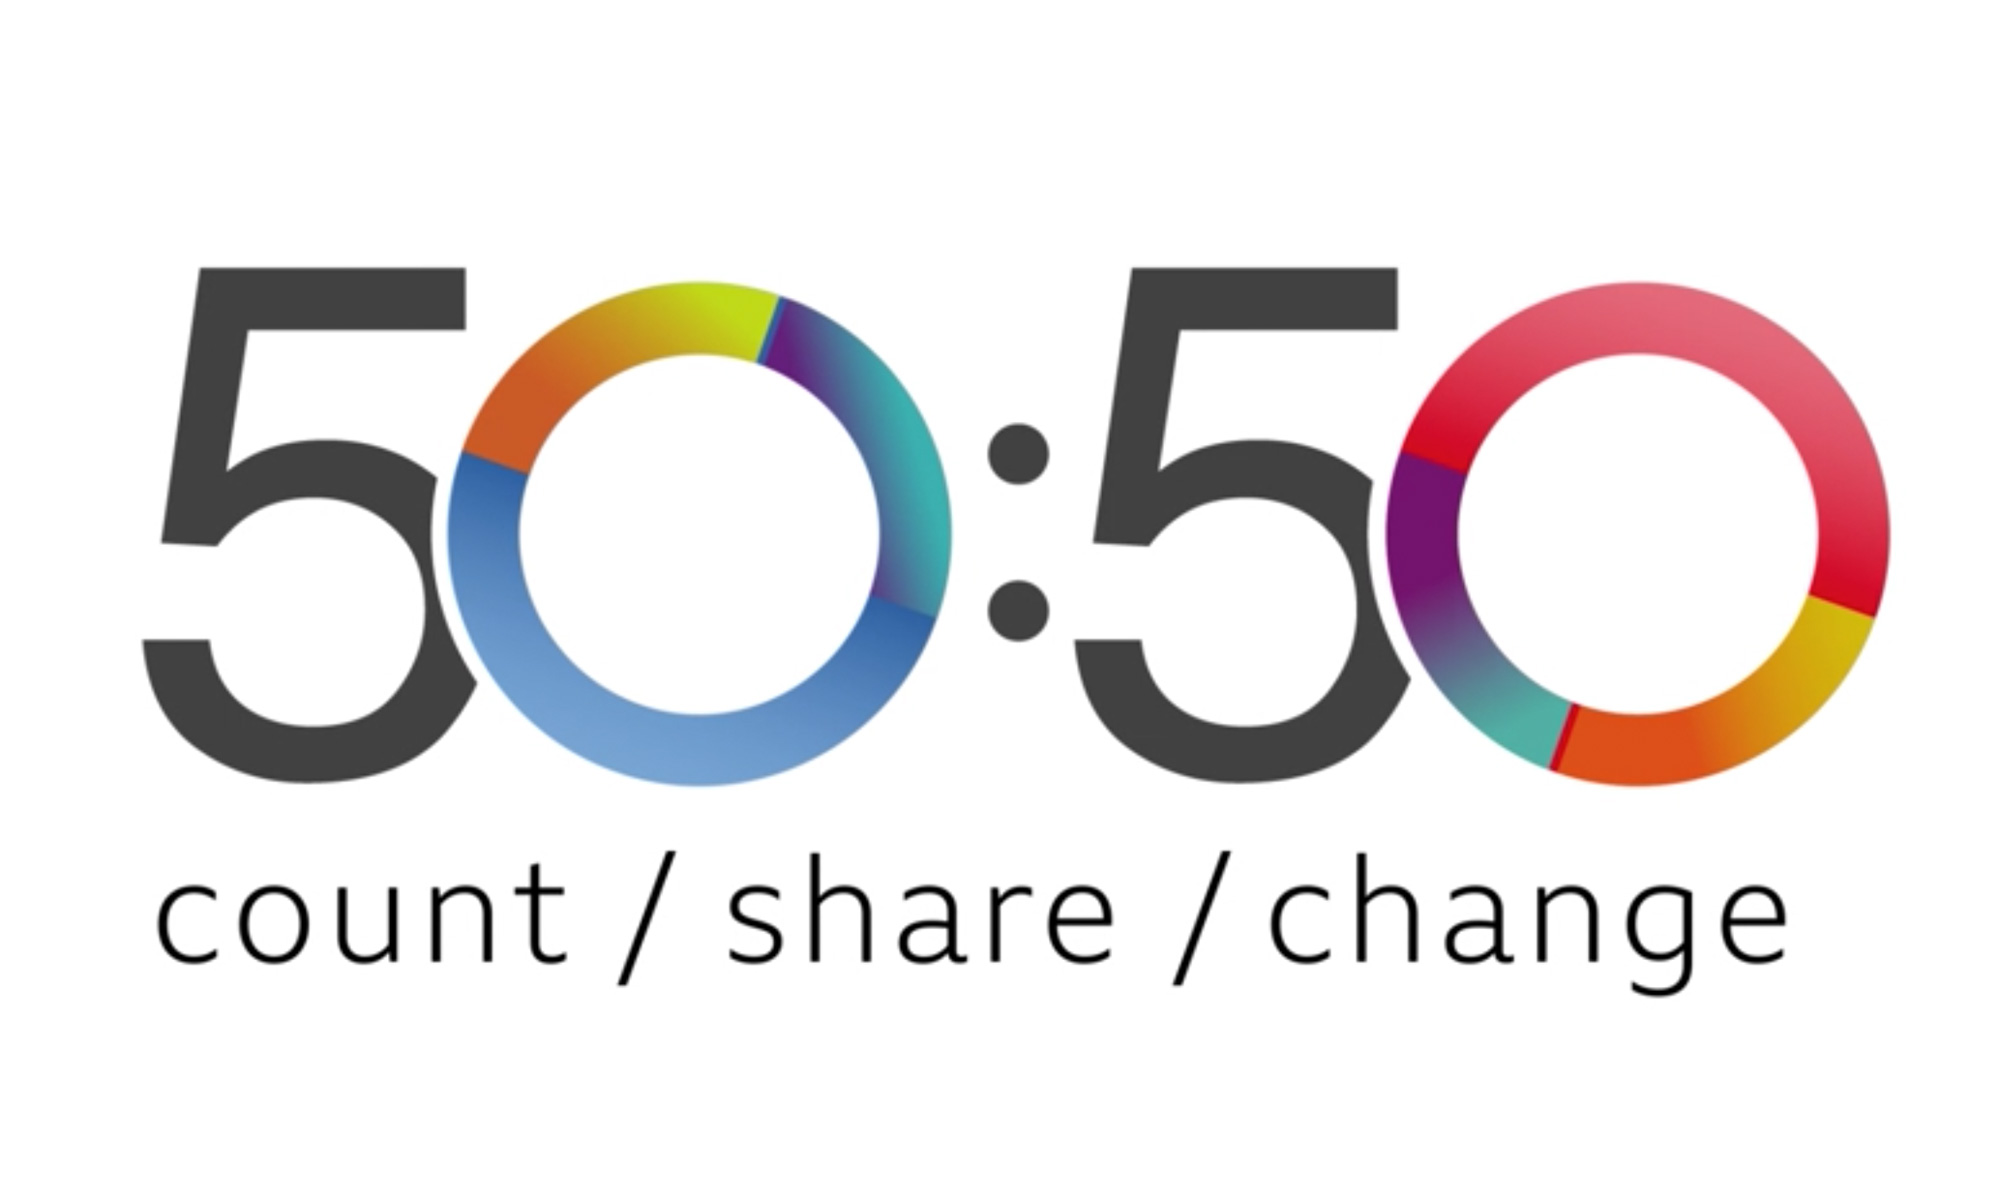 BBC 50:50 The Equality Project